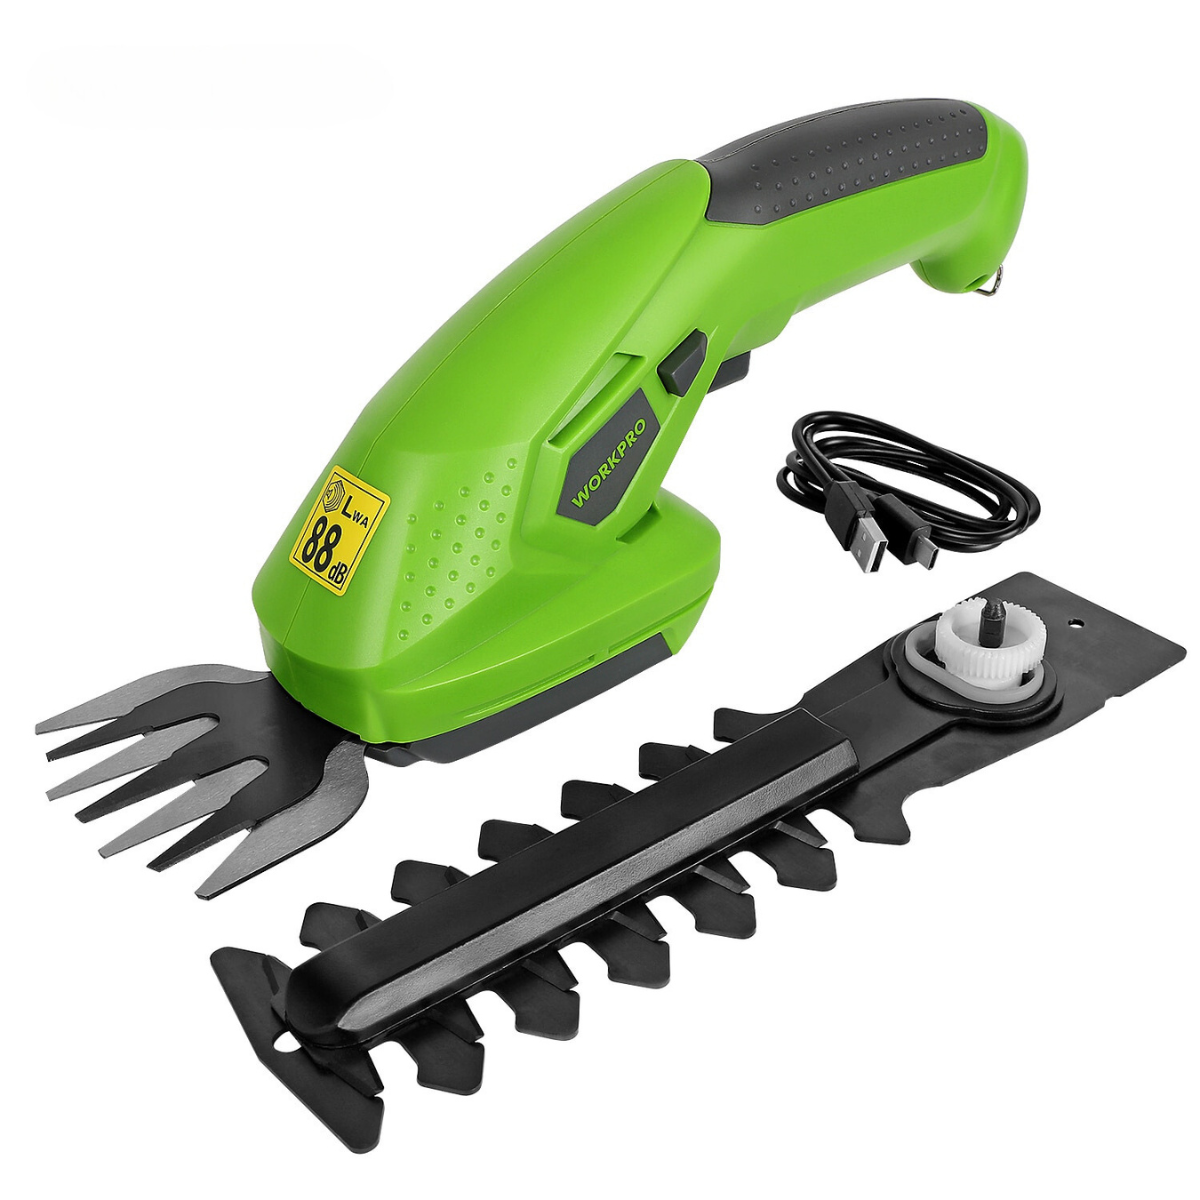 WORKPRO 3.6v 7.2v Cordless Battery Grass Shear-Trimmer 2 in 1 w Charger